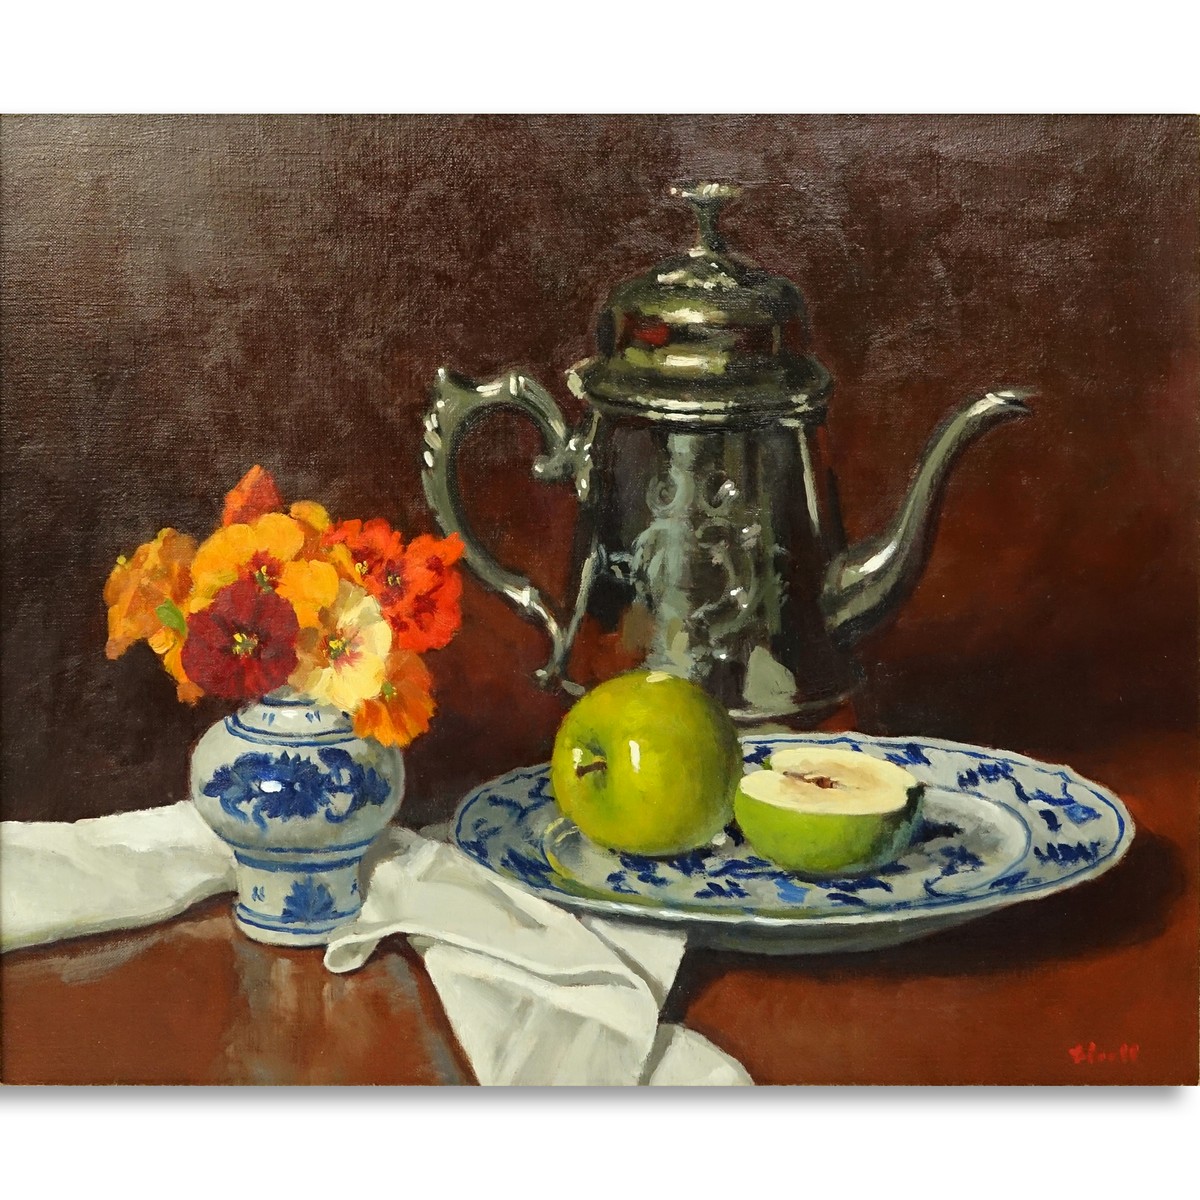 Gregory Stewart Hull, American (born 1950) Oil on Canvas "Still Life" Signed lower right, Wally Findlay Gallery Tag en verso. Good condition.